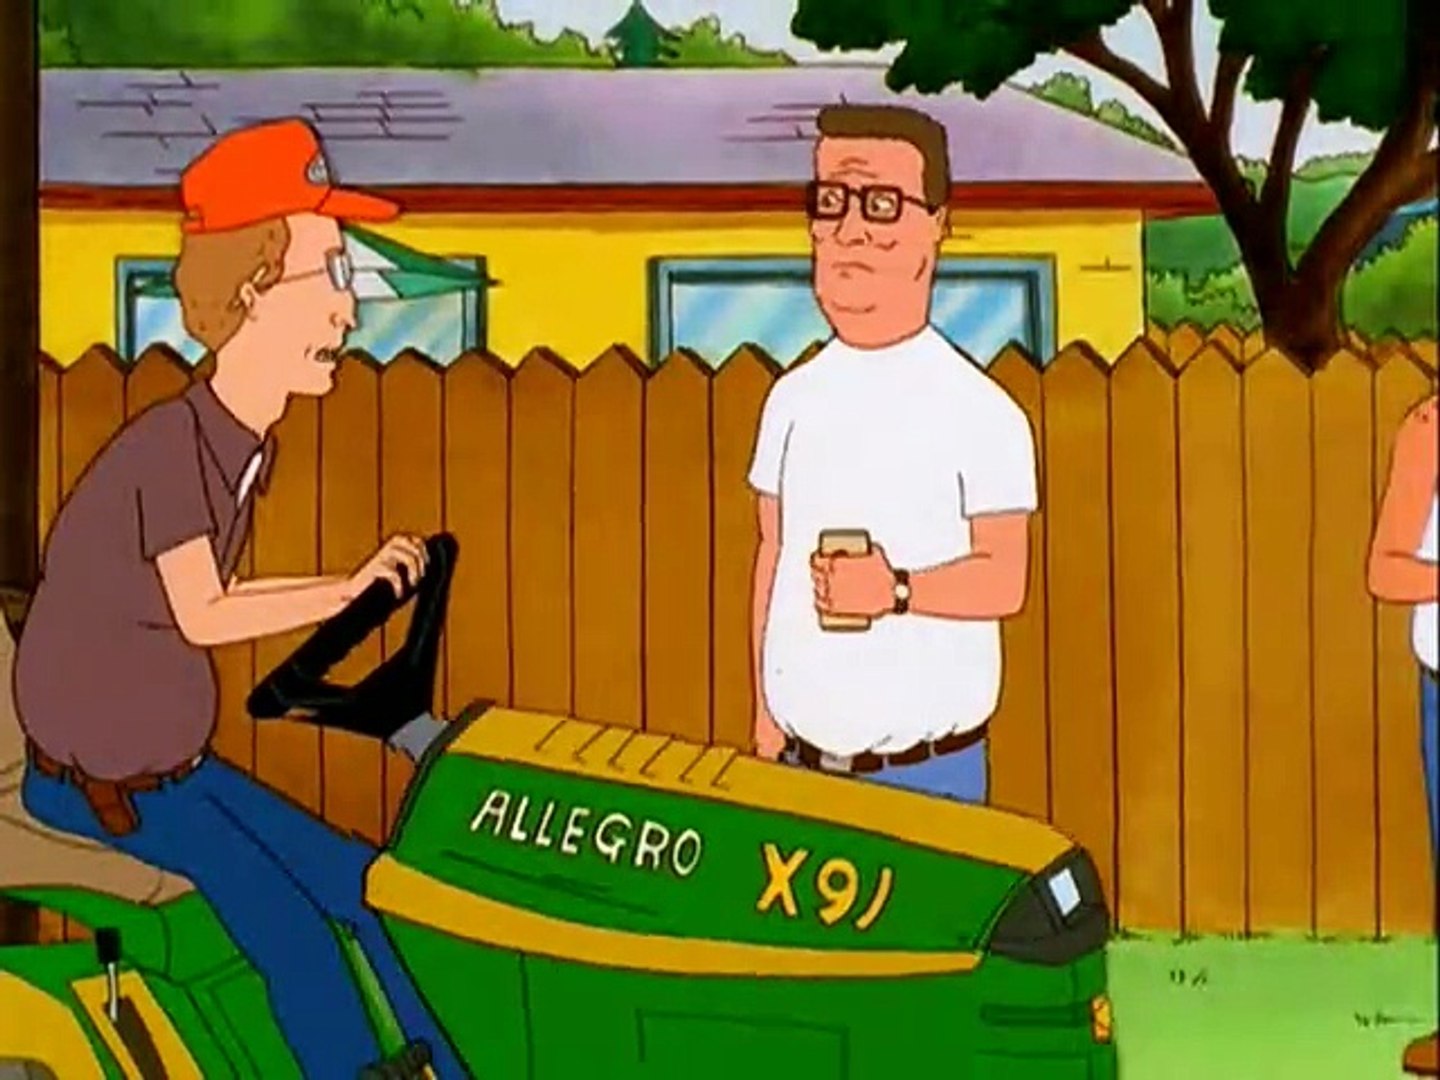 King of the Hill S6 - 20 - Dang Ol' Love - video Dailymotion